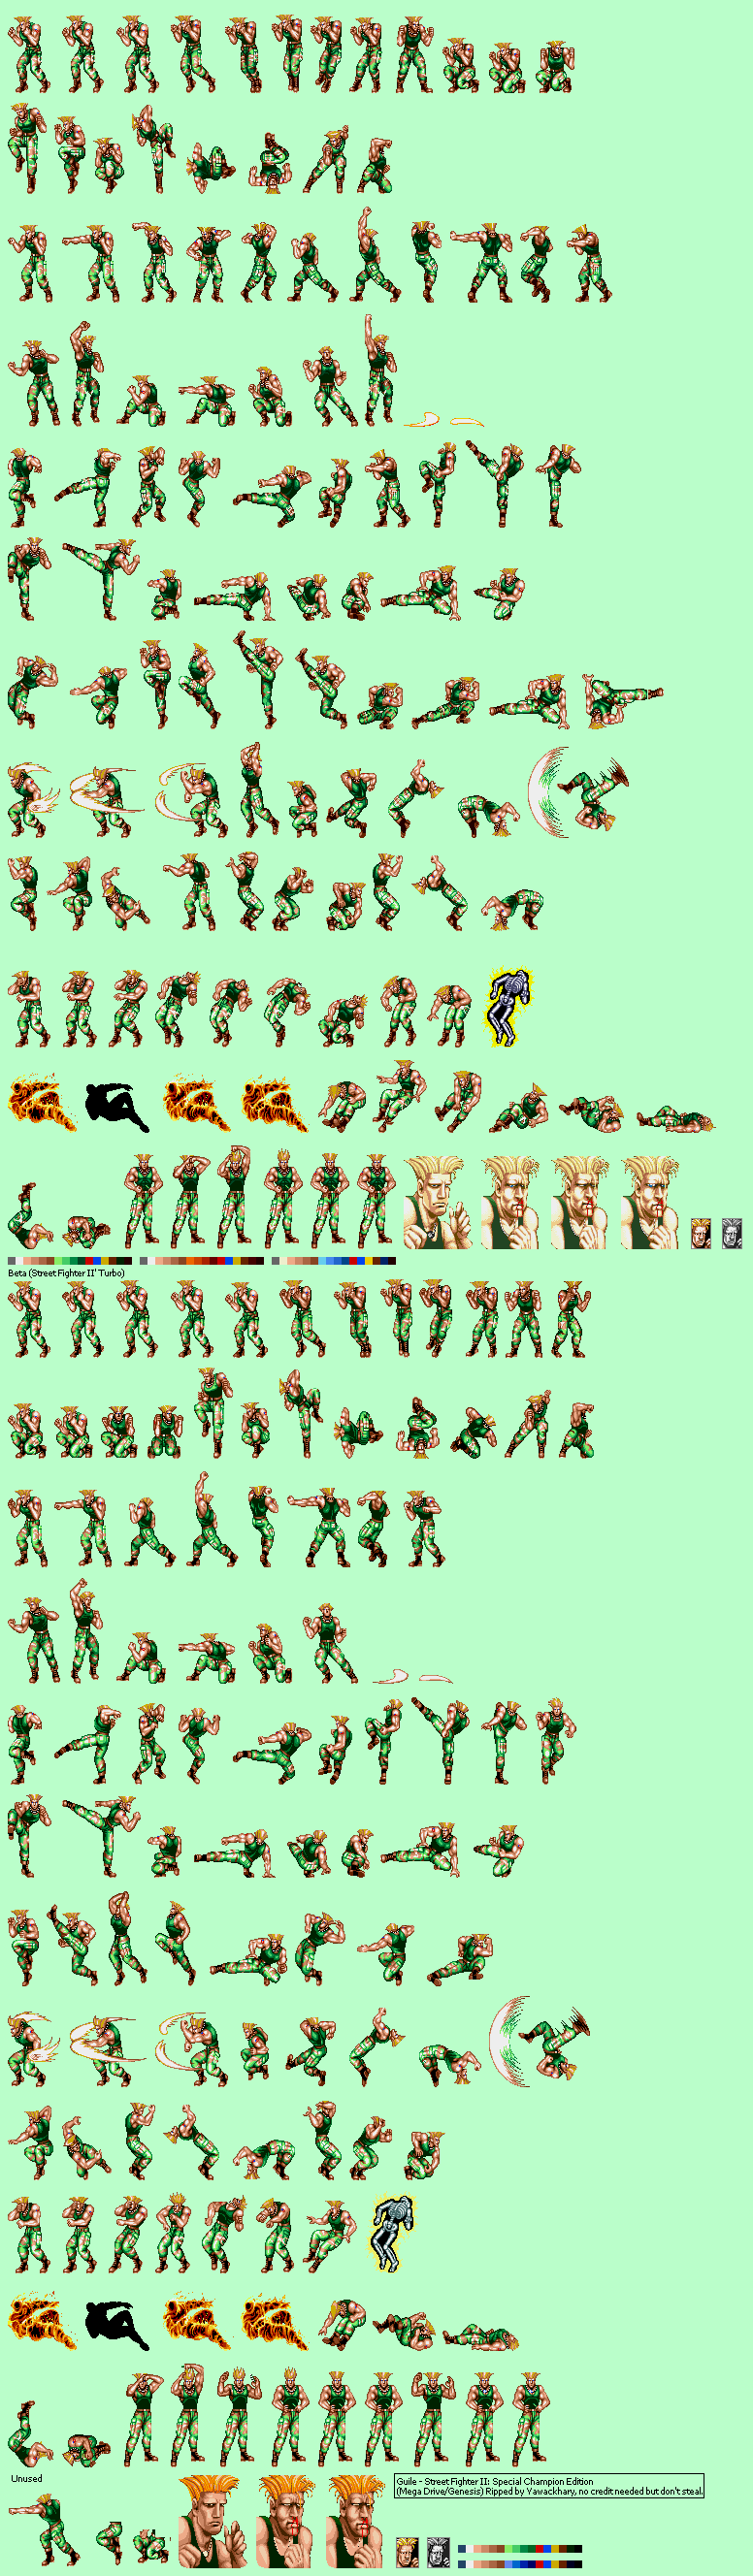 All Street Fighters sprites, fighting games